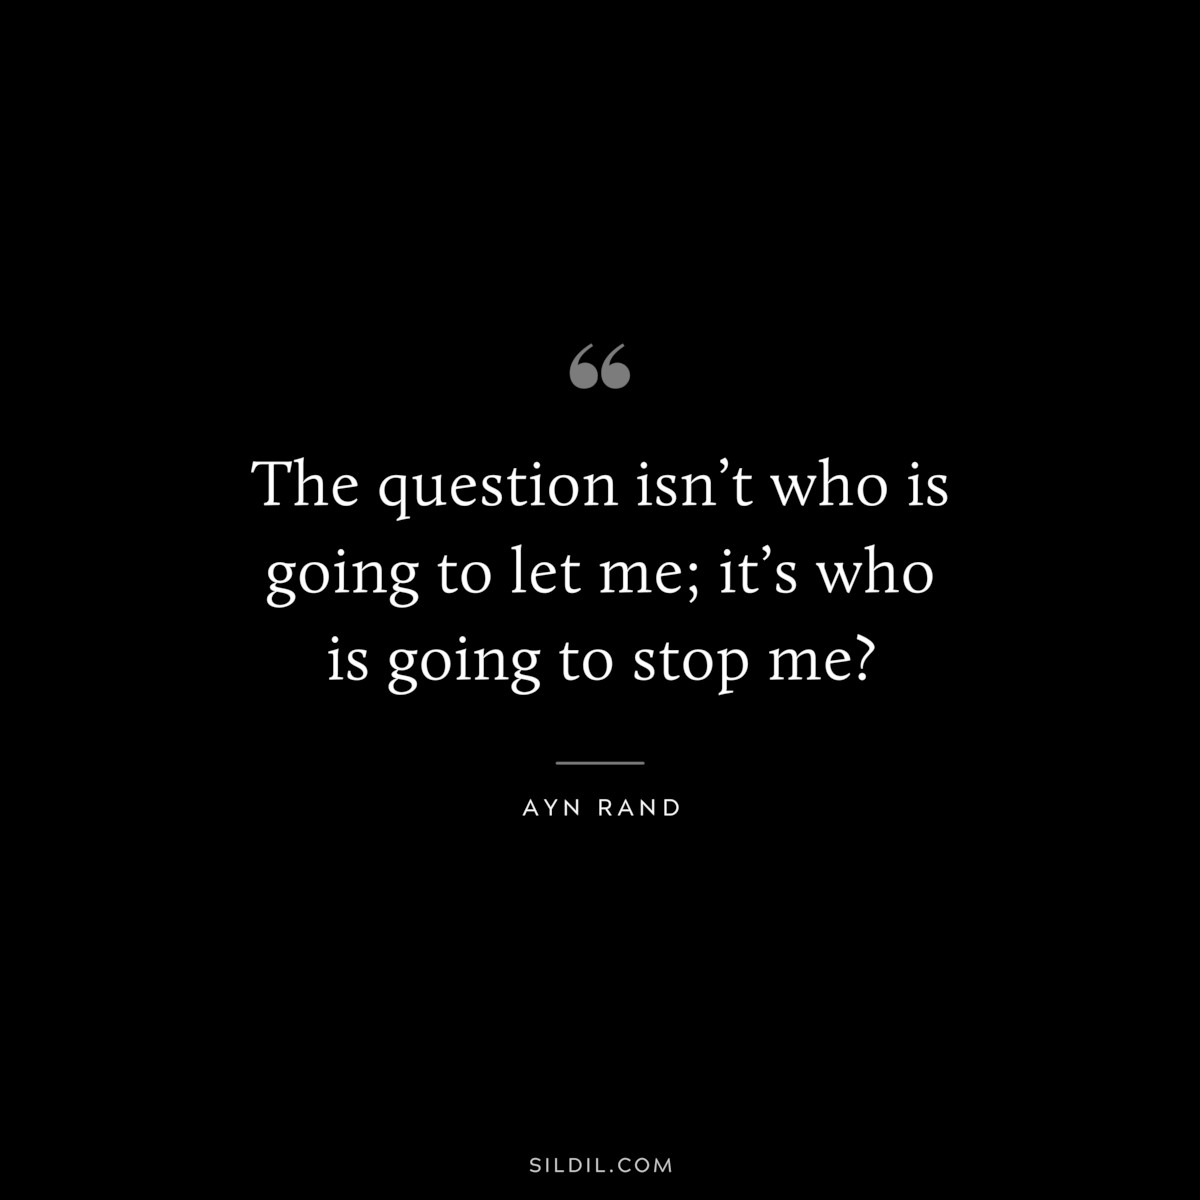 The question isn’t who is going to let me; it’s who is going to stop me? – Ayn Rand